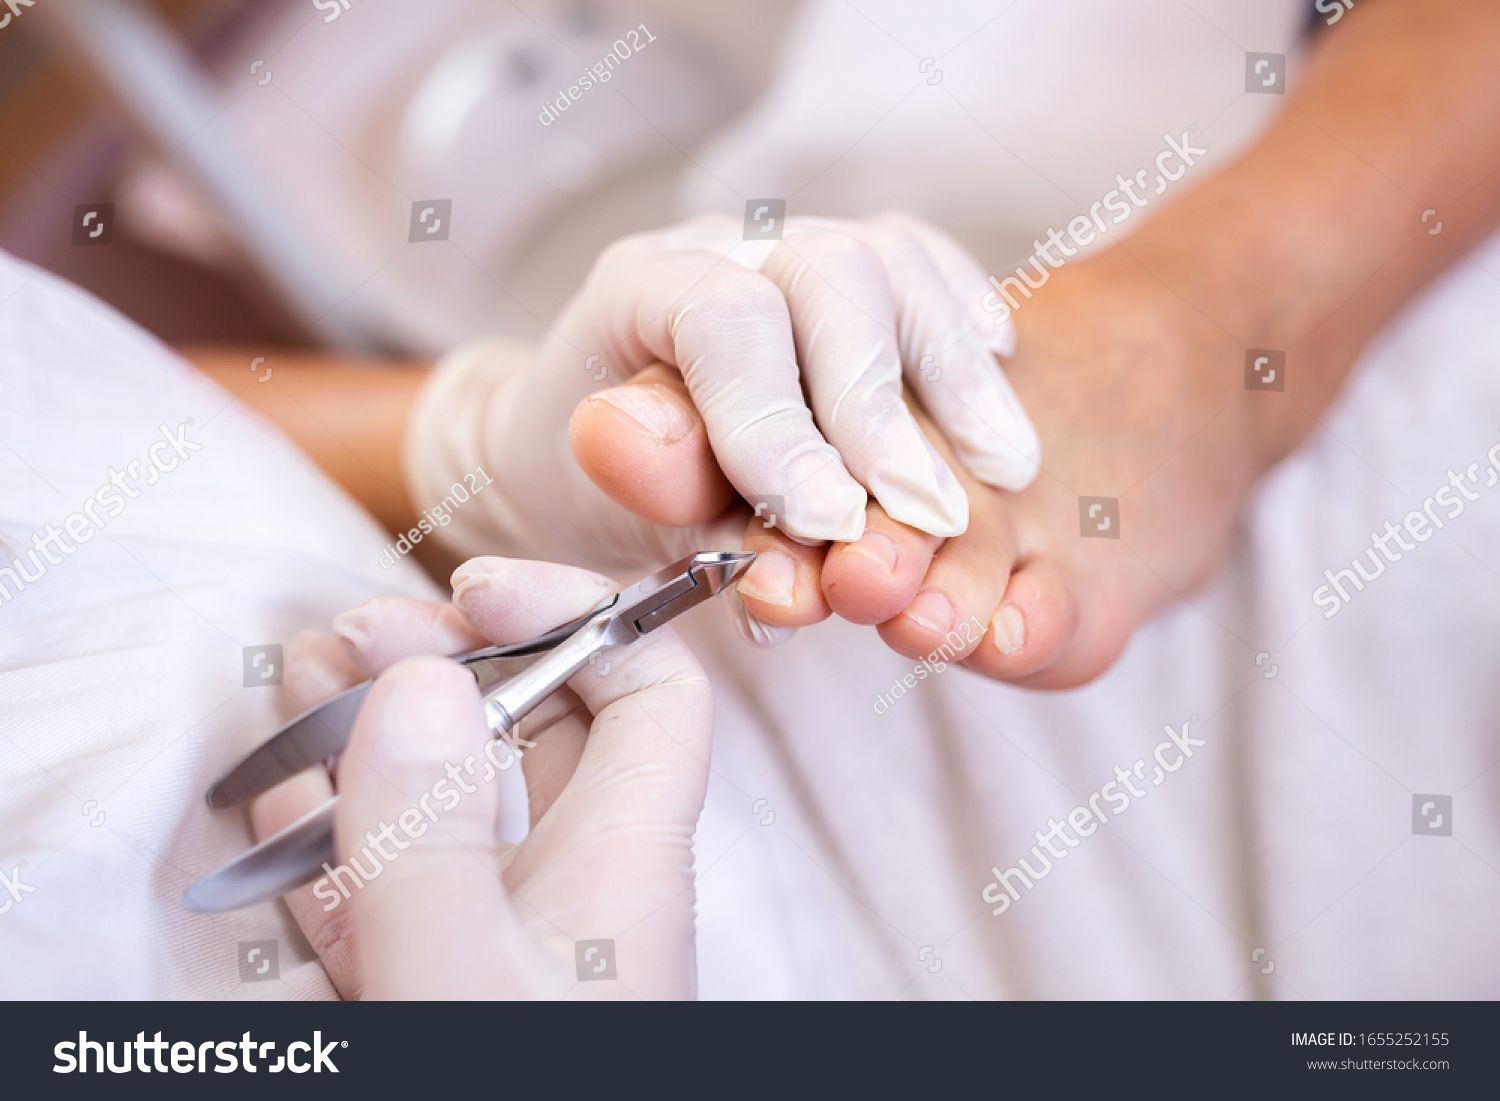 Pedicure salon employee using nail nippers while trimming toe nails #1655252155